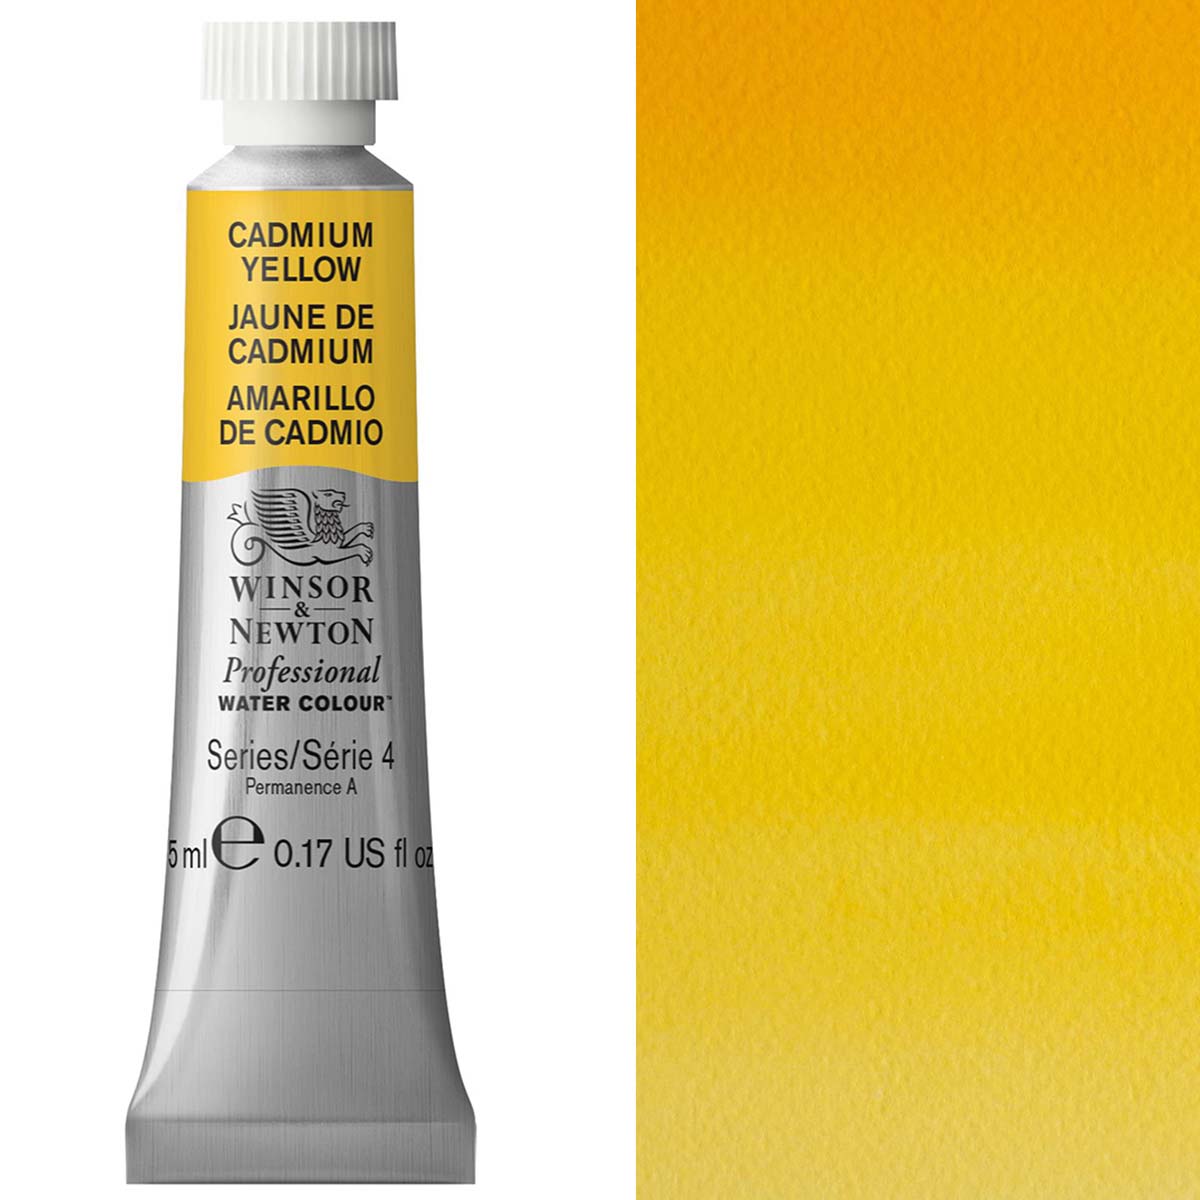 Winsor and Newton - Professional Artists' Watercolour - 5ml - Cadmium Yellow